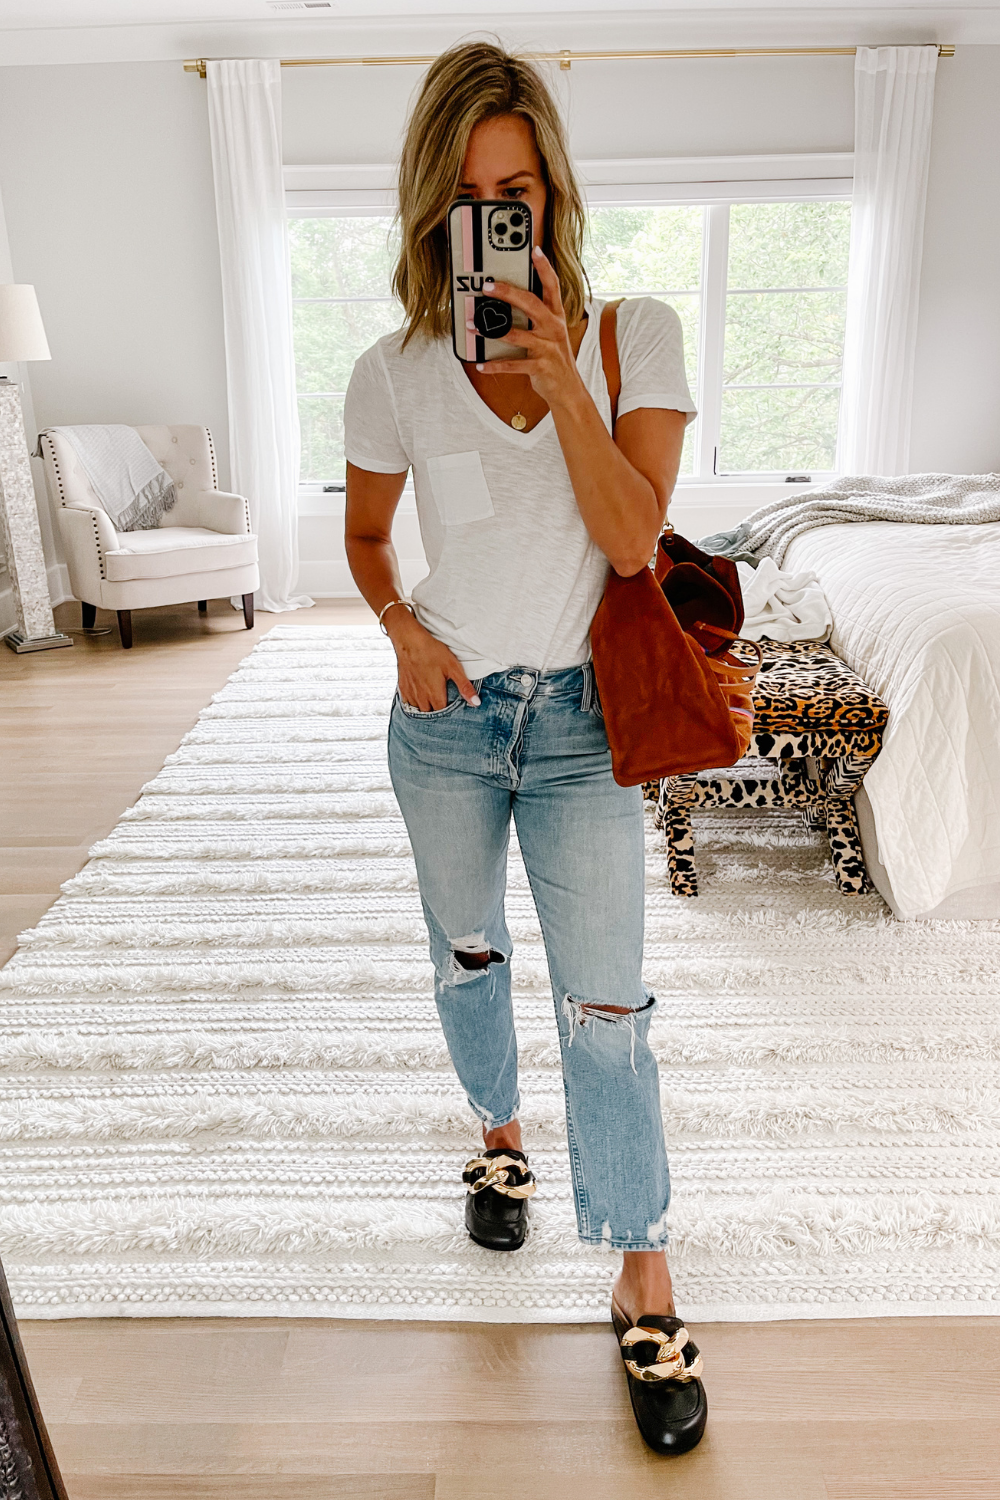 Suzanne wearing a white tee, Tomcat denim, loafers, suede bag 